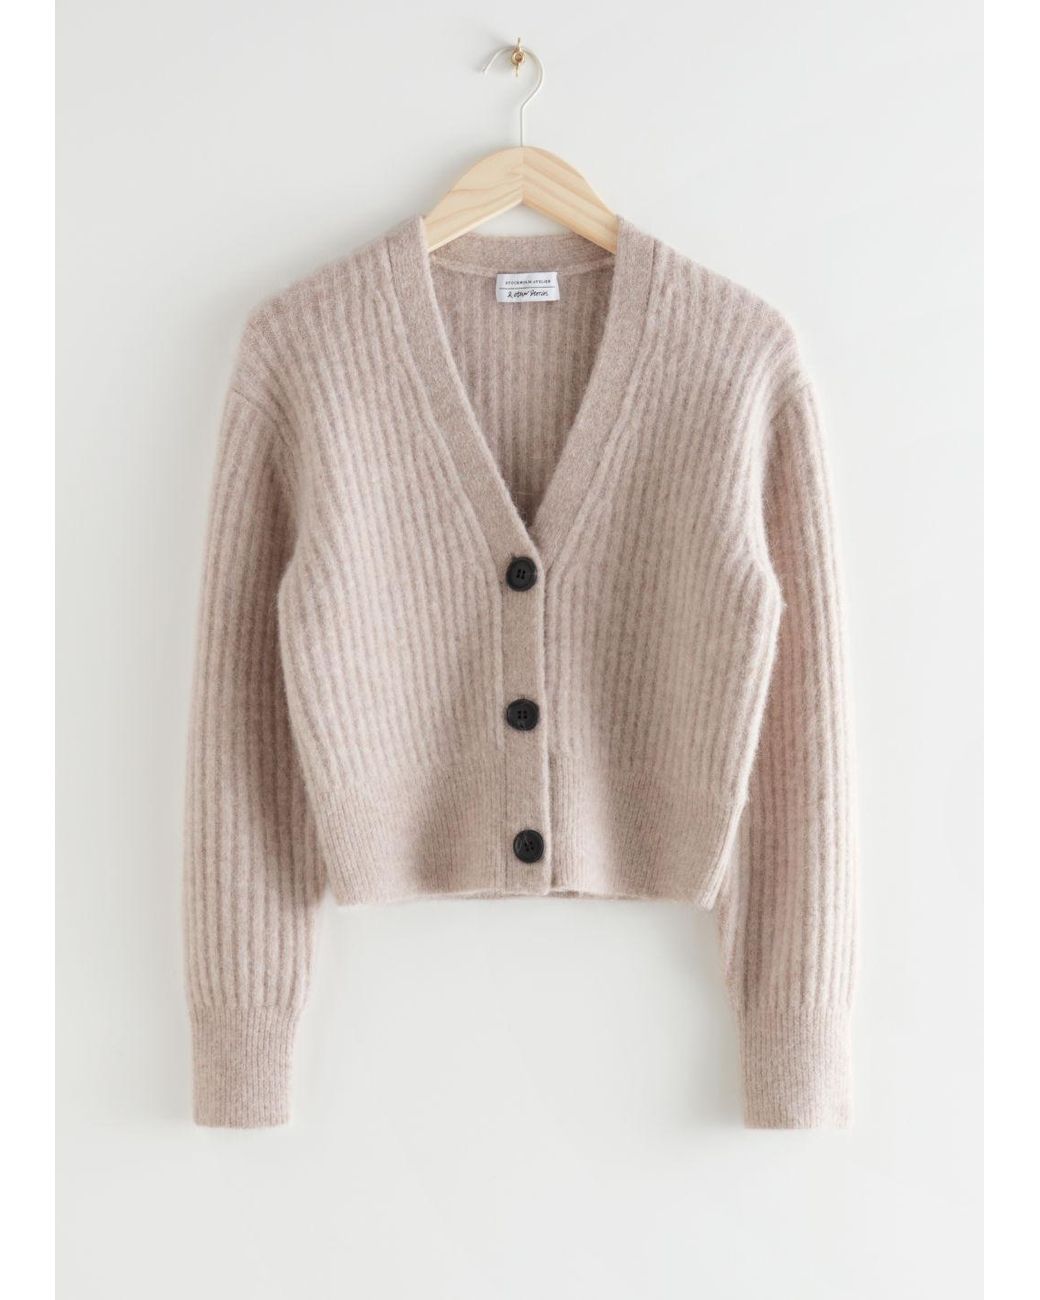 & Other Stories Wool Cropped Ribbed Alpaca Blend Cardigan in Beige ...